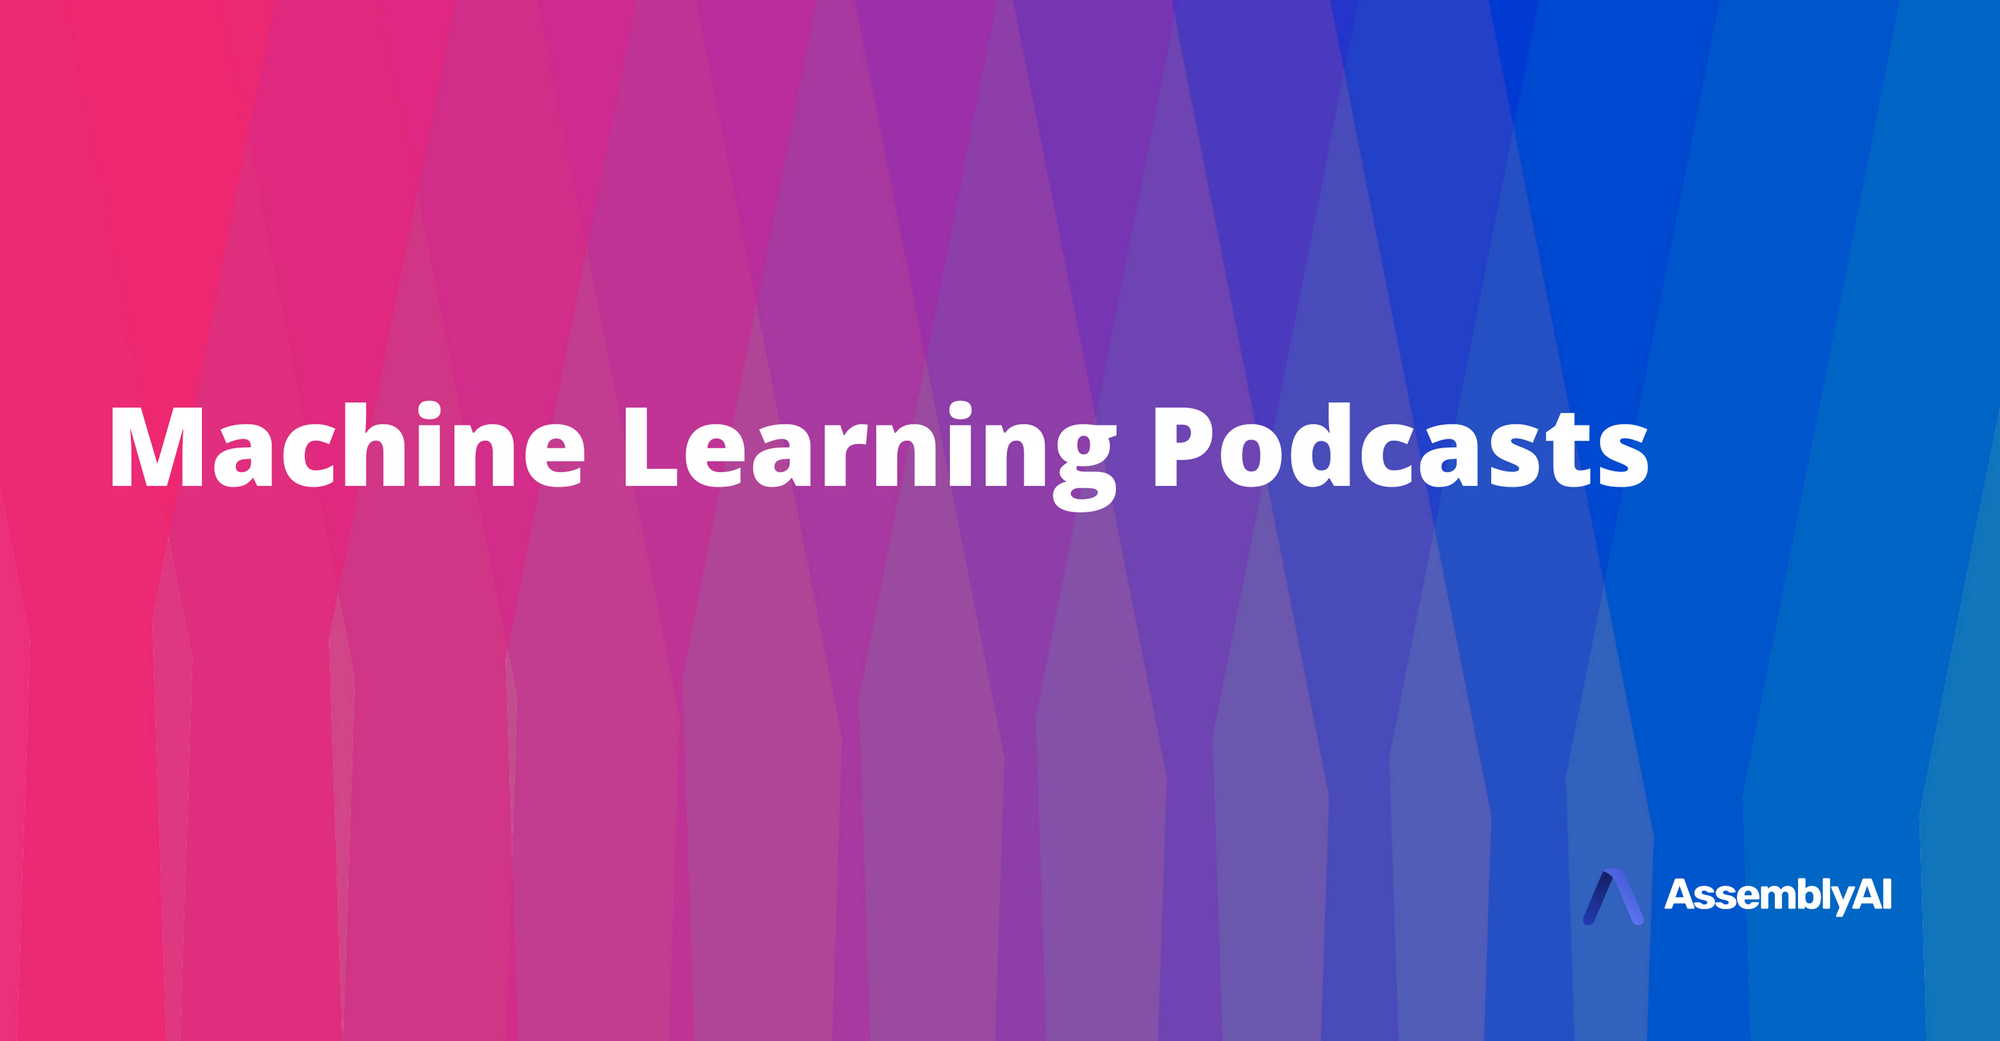 Machine Learning Podcasts - The Ultimate Listening Guide